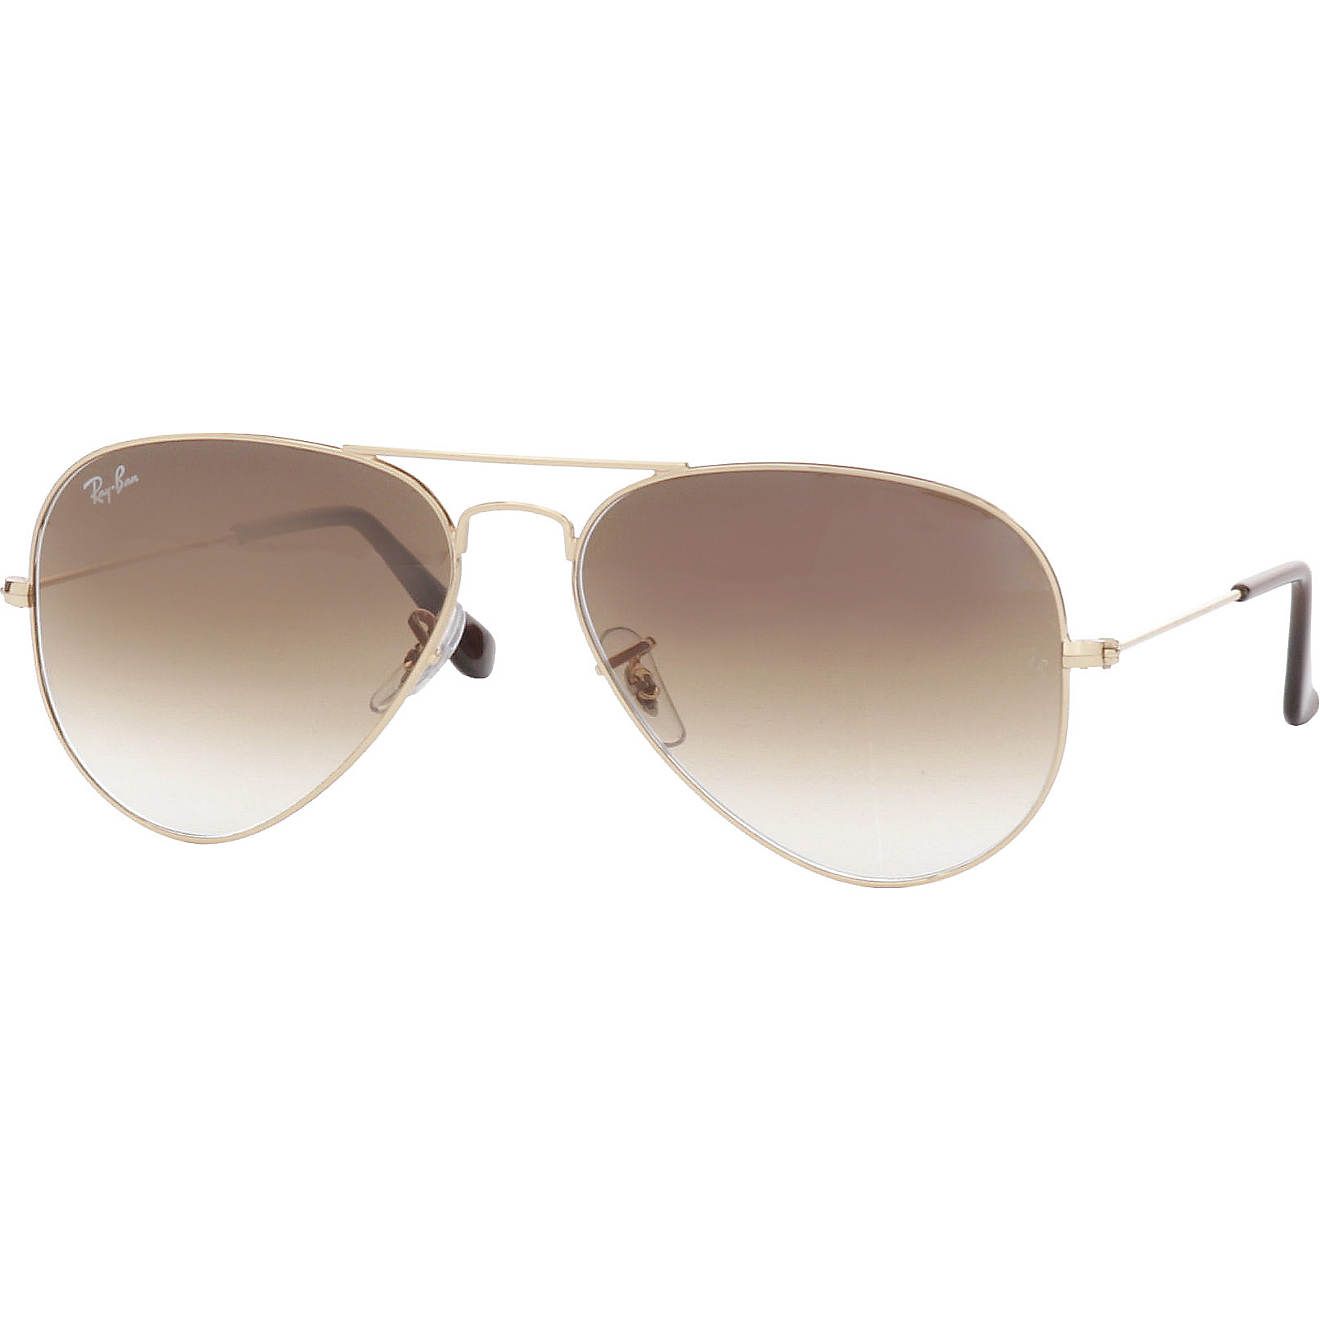 Ray-Ban Aviator Sunglasses | Academy Sports + Outdoor Affiliate